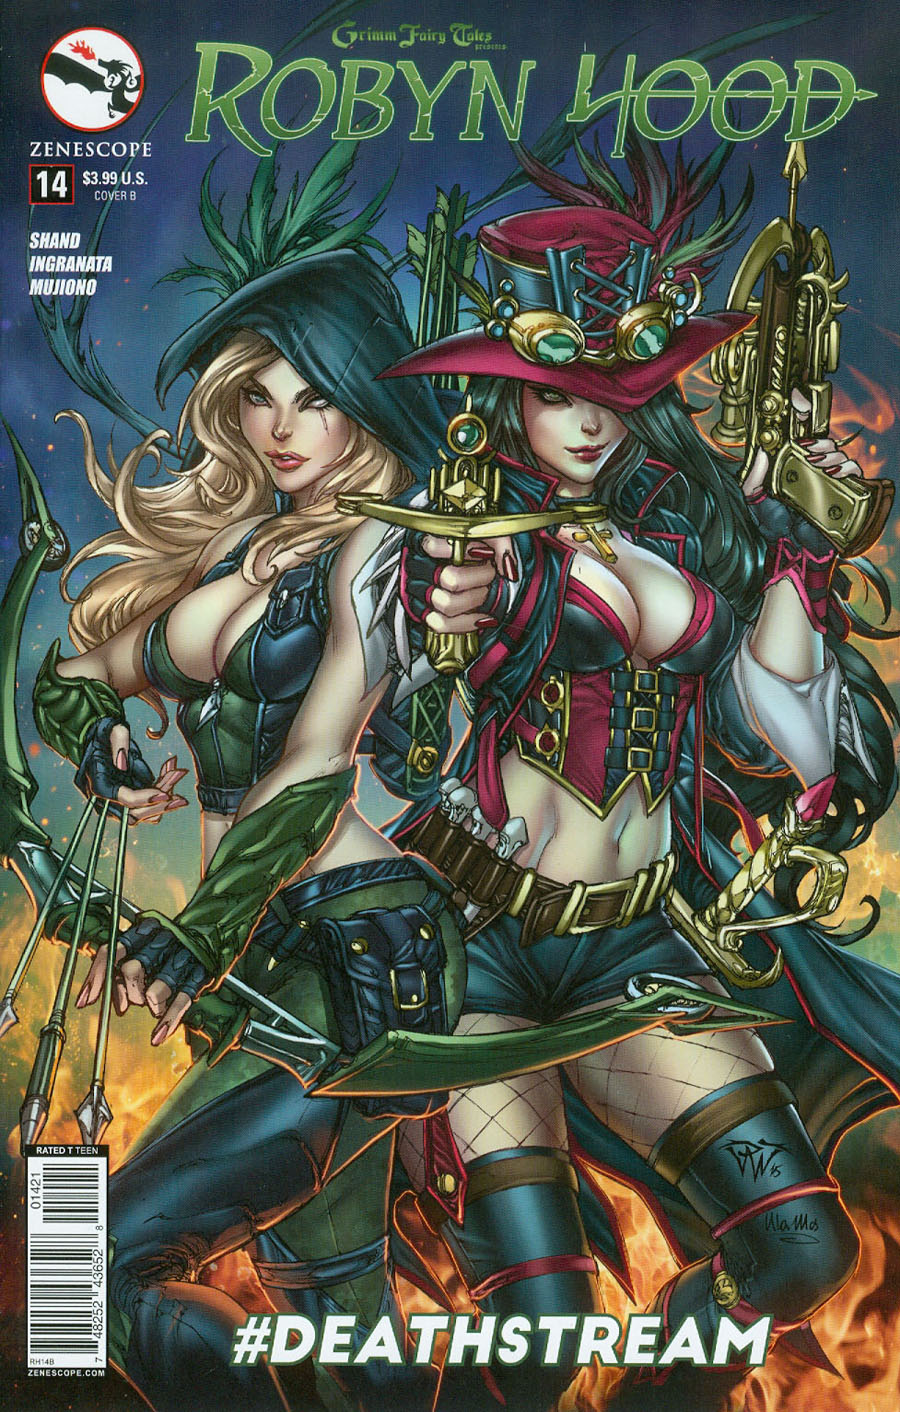 Grimm Fairy Tales Presents Robyn Hood Vol 2 #14 Cover B Paolo Pantalena